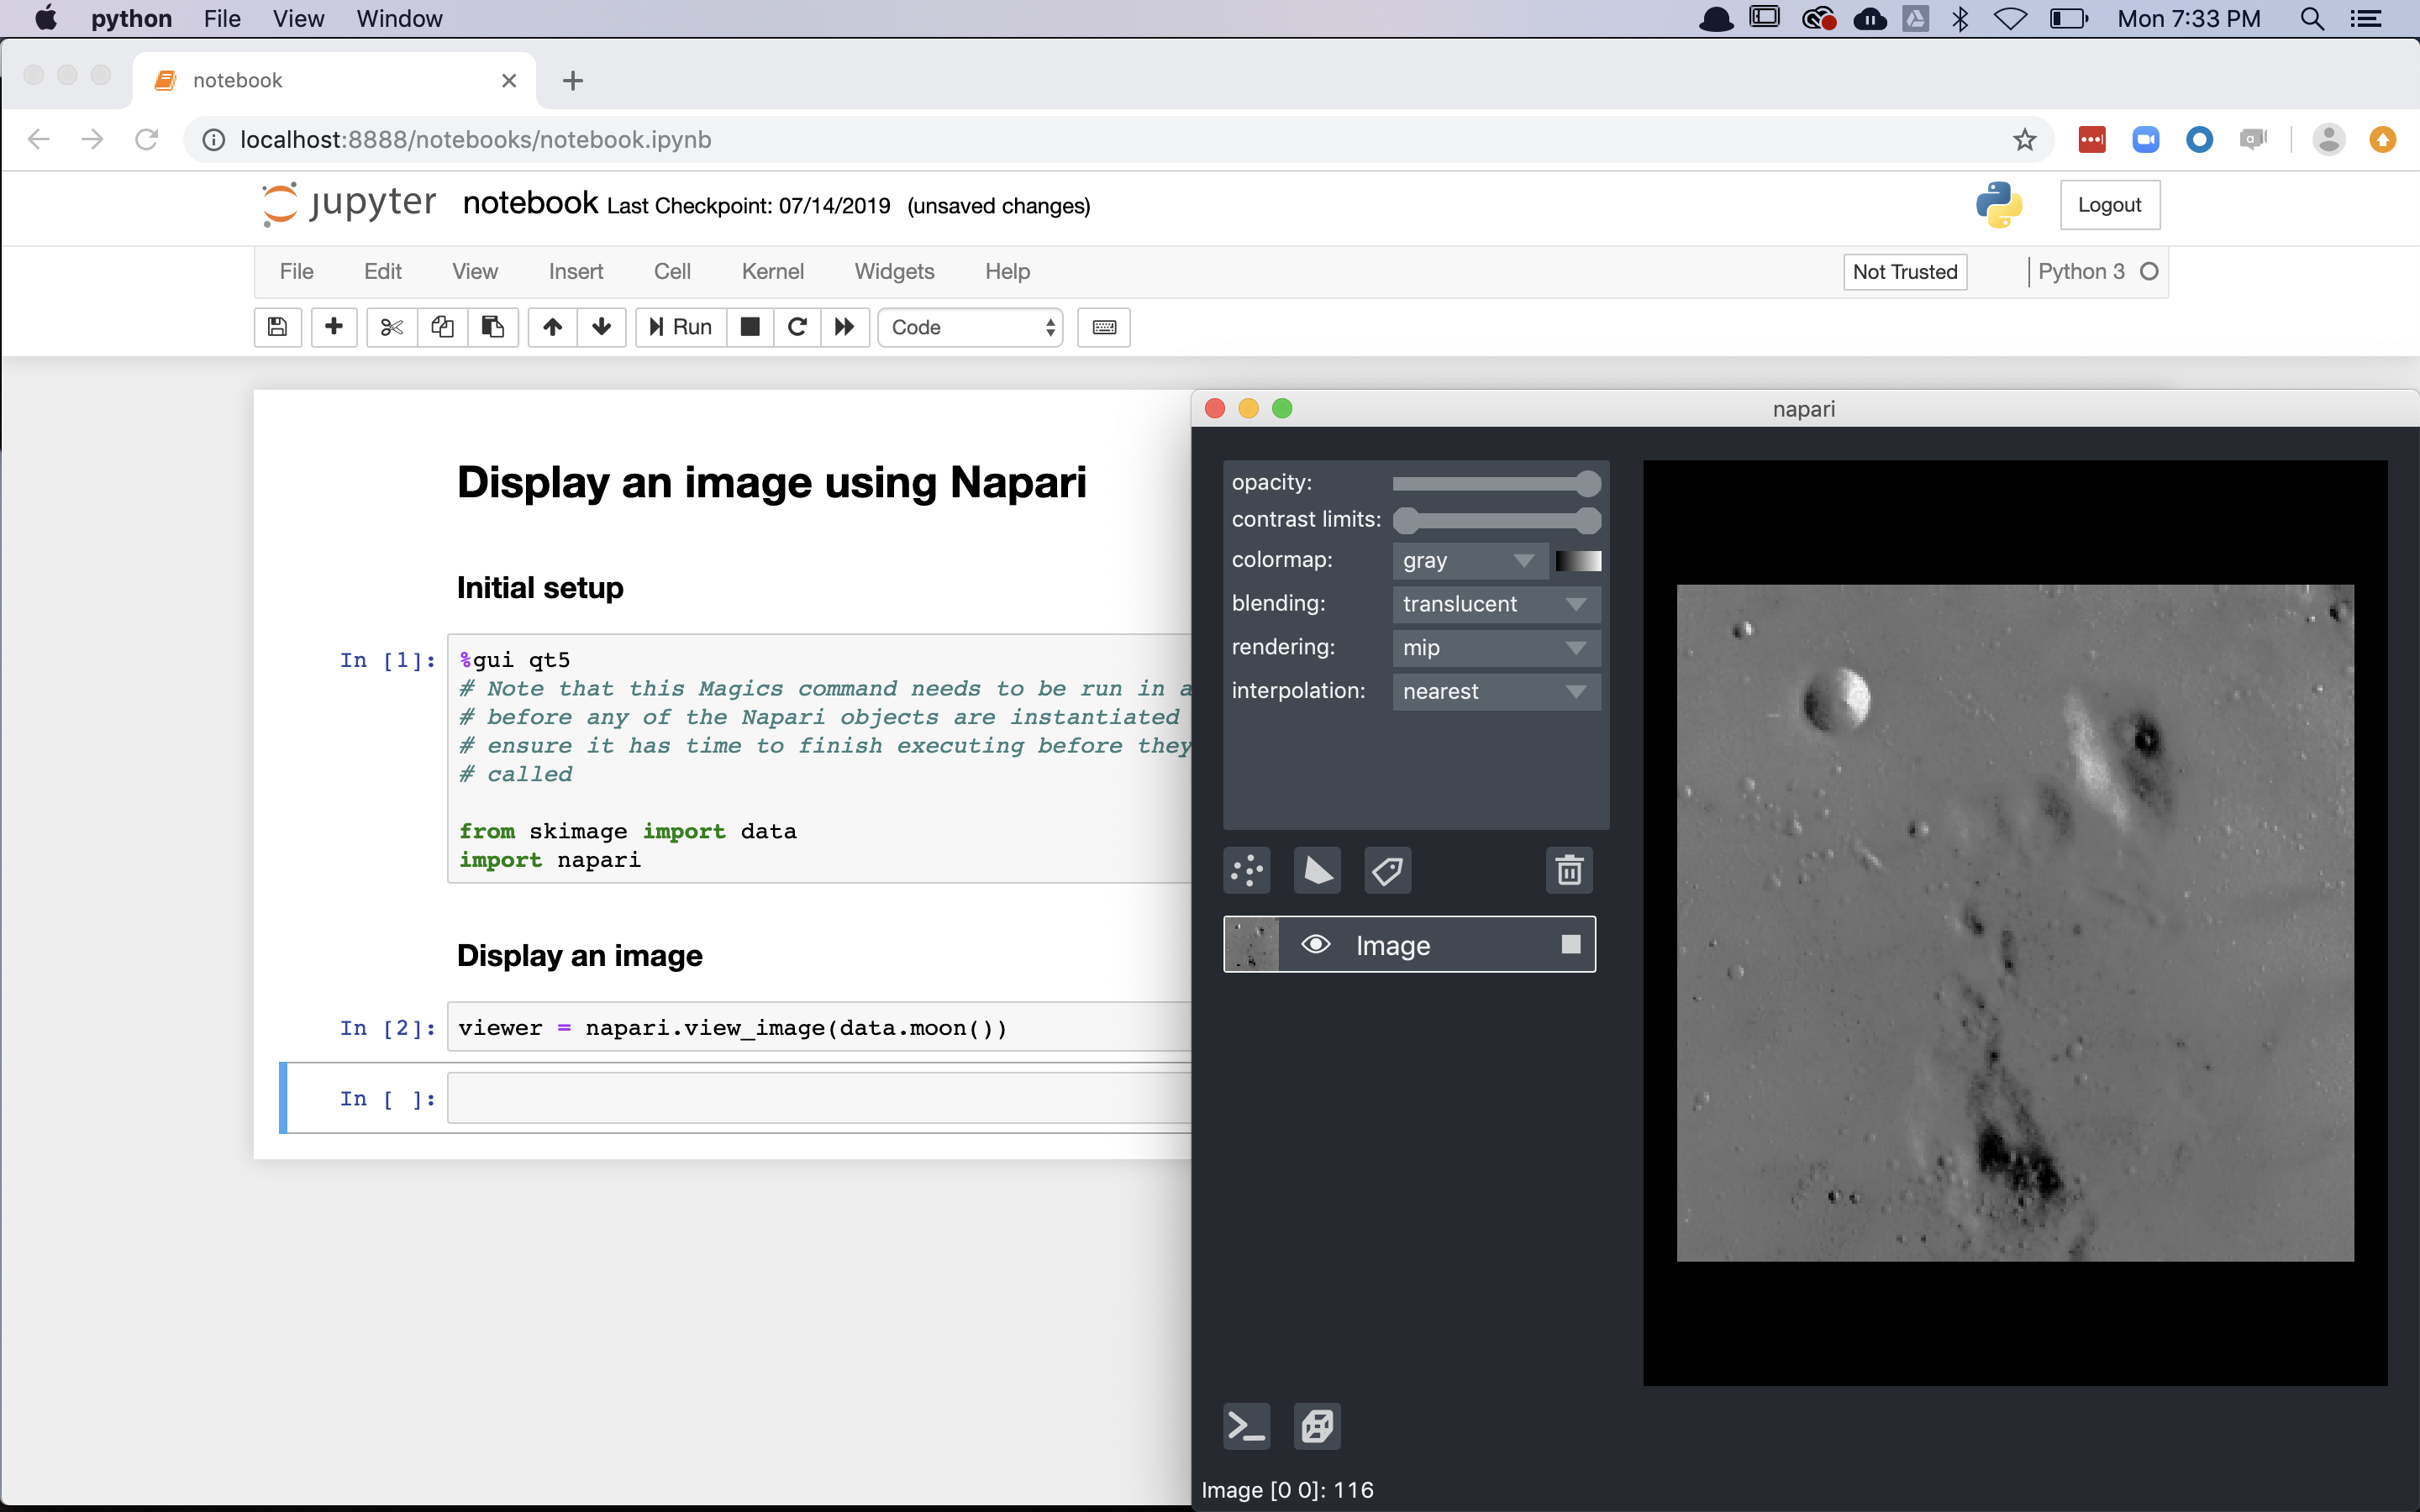 image: napari launched from a jupyter notebook